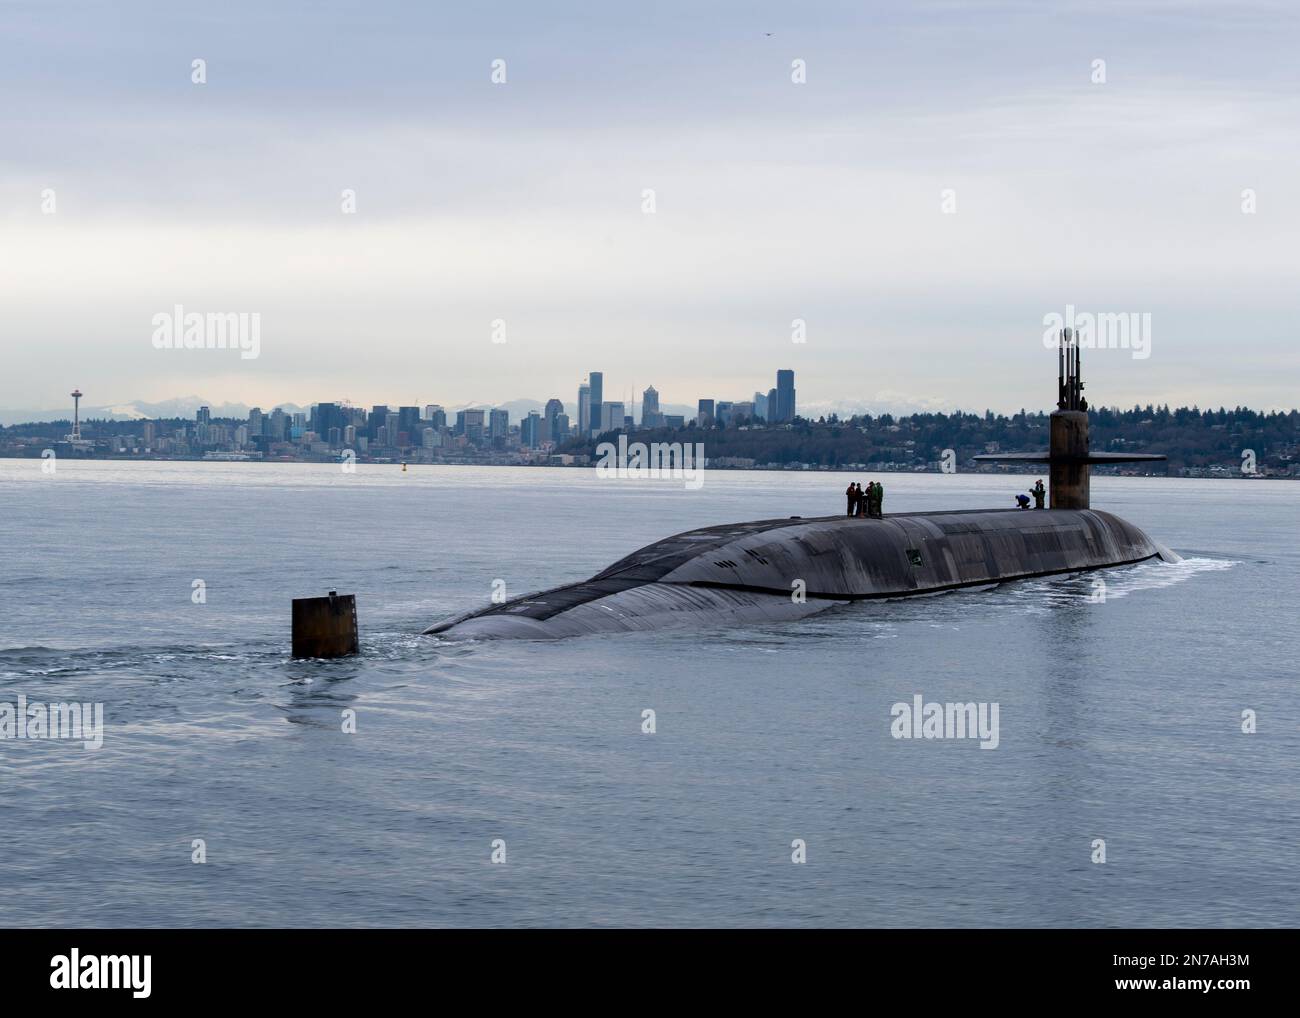 230209-N-ED185-1316  PUGET SOUND, Wash. (Feb. 9, 2023) The Ohio-class ballistic missile submarine USS Louisiana (SSBN 743) transits Puget Sound past the Seattle skyline following a 41-month engineered refueling overhaul at Puget Sound Naval Shipyard and Intermediate Maintenance Facility, February 9, 2023. Louisiana is one of eight ballistic-missile submarines stationed at Naval Base Kitsap-Bangor, providing the most survivable leg of the strategic deterrence triad for the United States. (U.S. Navy photo by Mass Communication Specialist 1st Class Brian G. Reynolds) Stock Photo